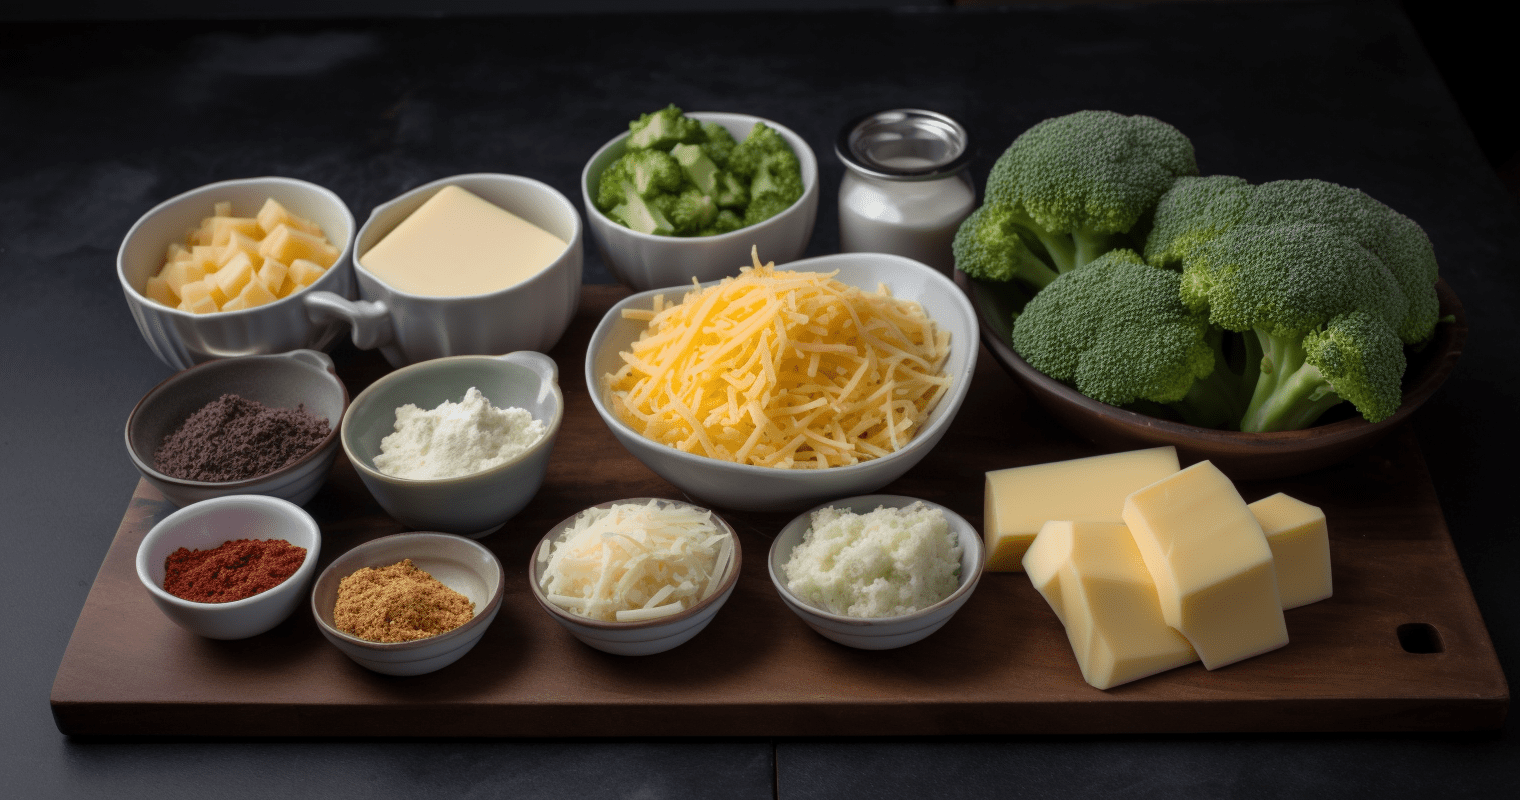 Broccoli and Cheddar Soup Ingredients